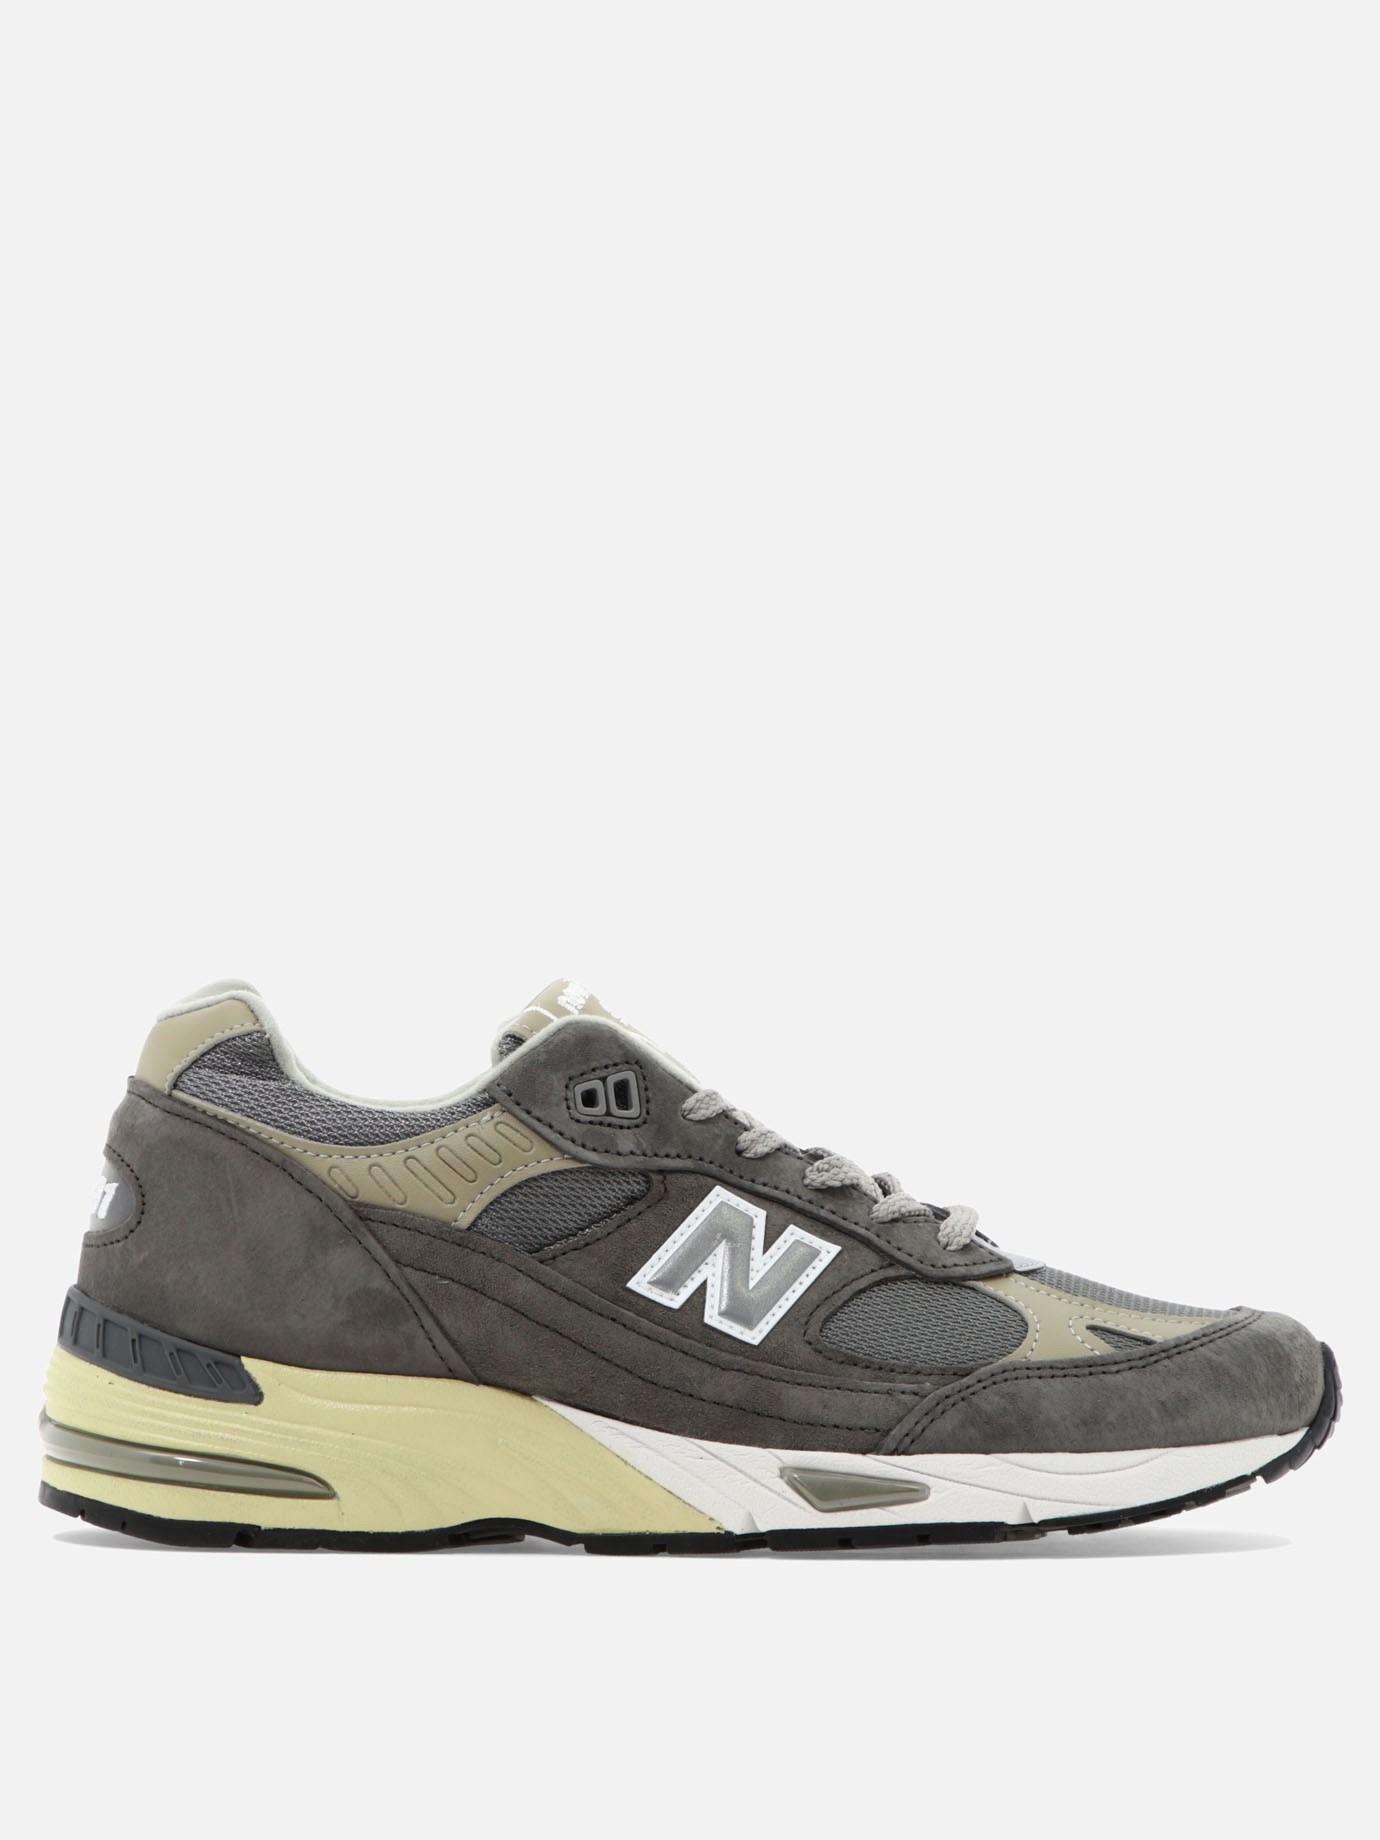  M991  sneakersby New Balance - 3